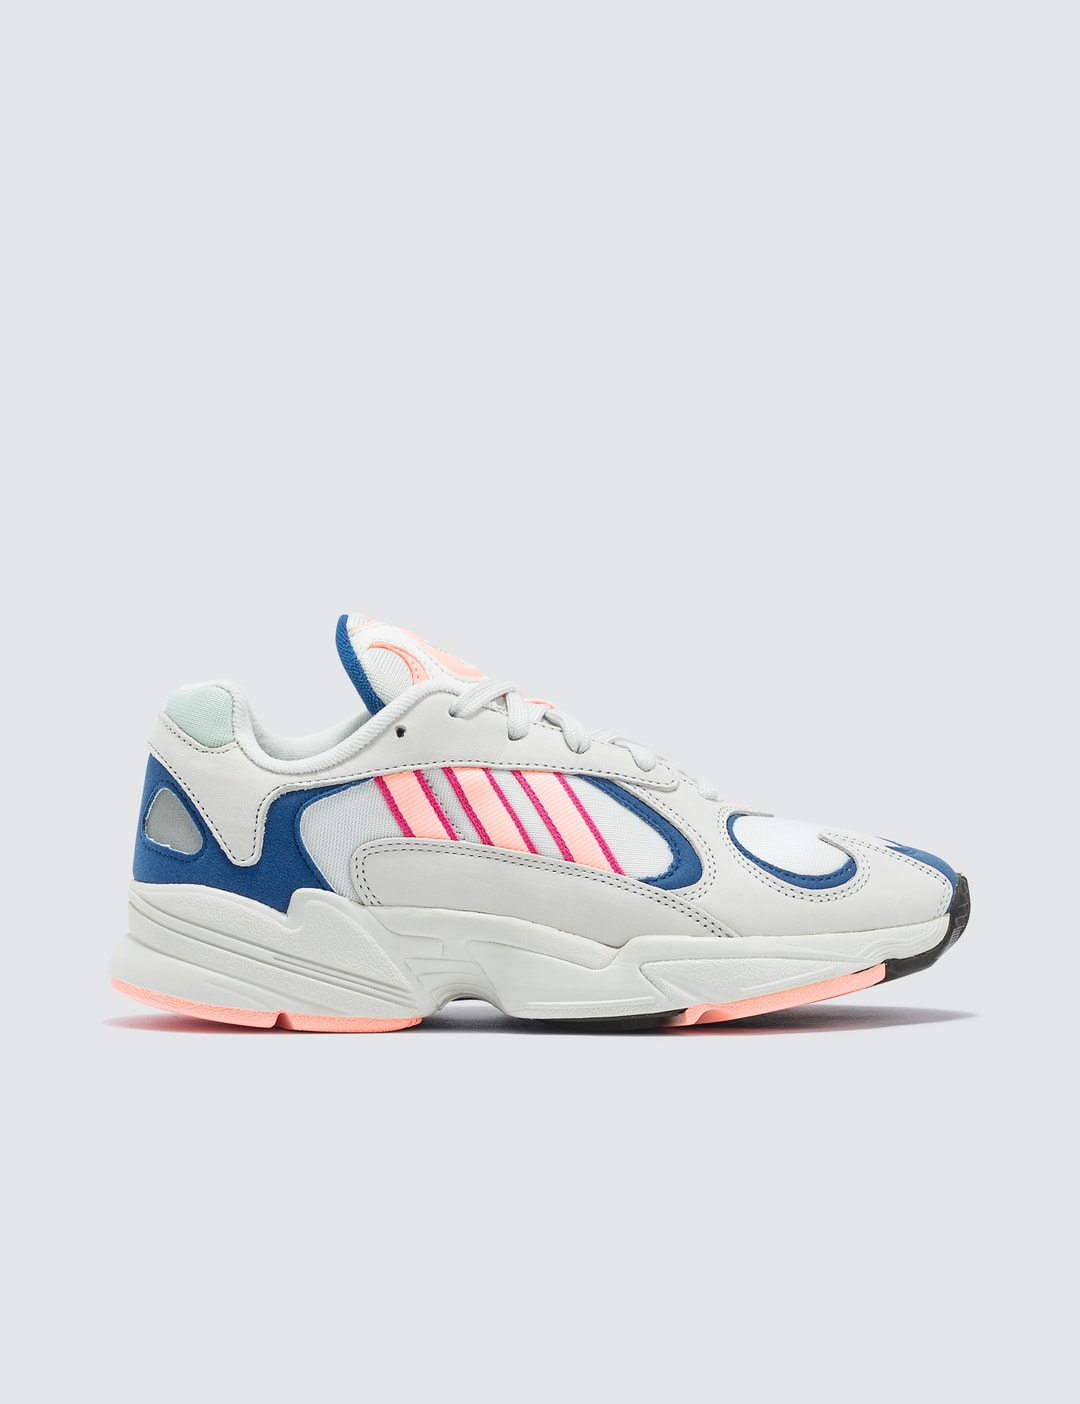 Adidas Originals - Yung-1 Sneaker | HBX - Globally Fashion and by Hypebeast